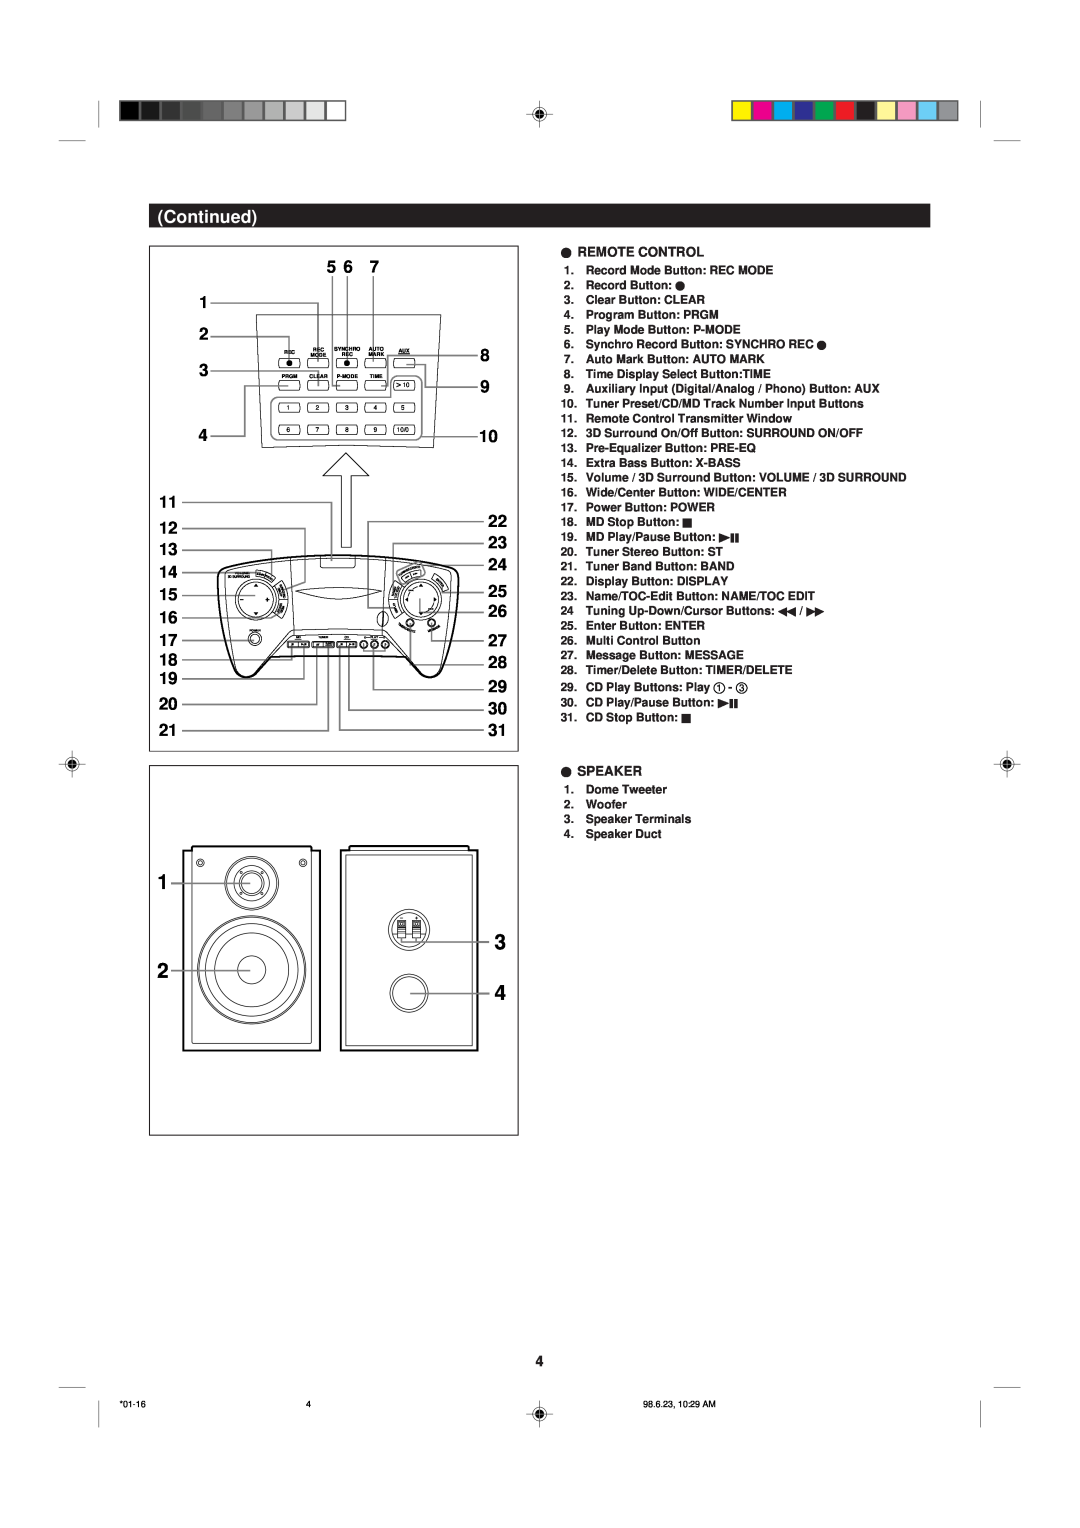 Sharp MD-X8 operation manual Continued, Iremote Control, Ispeaker 